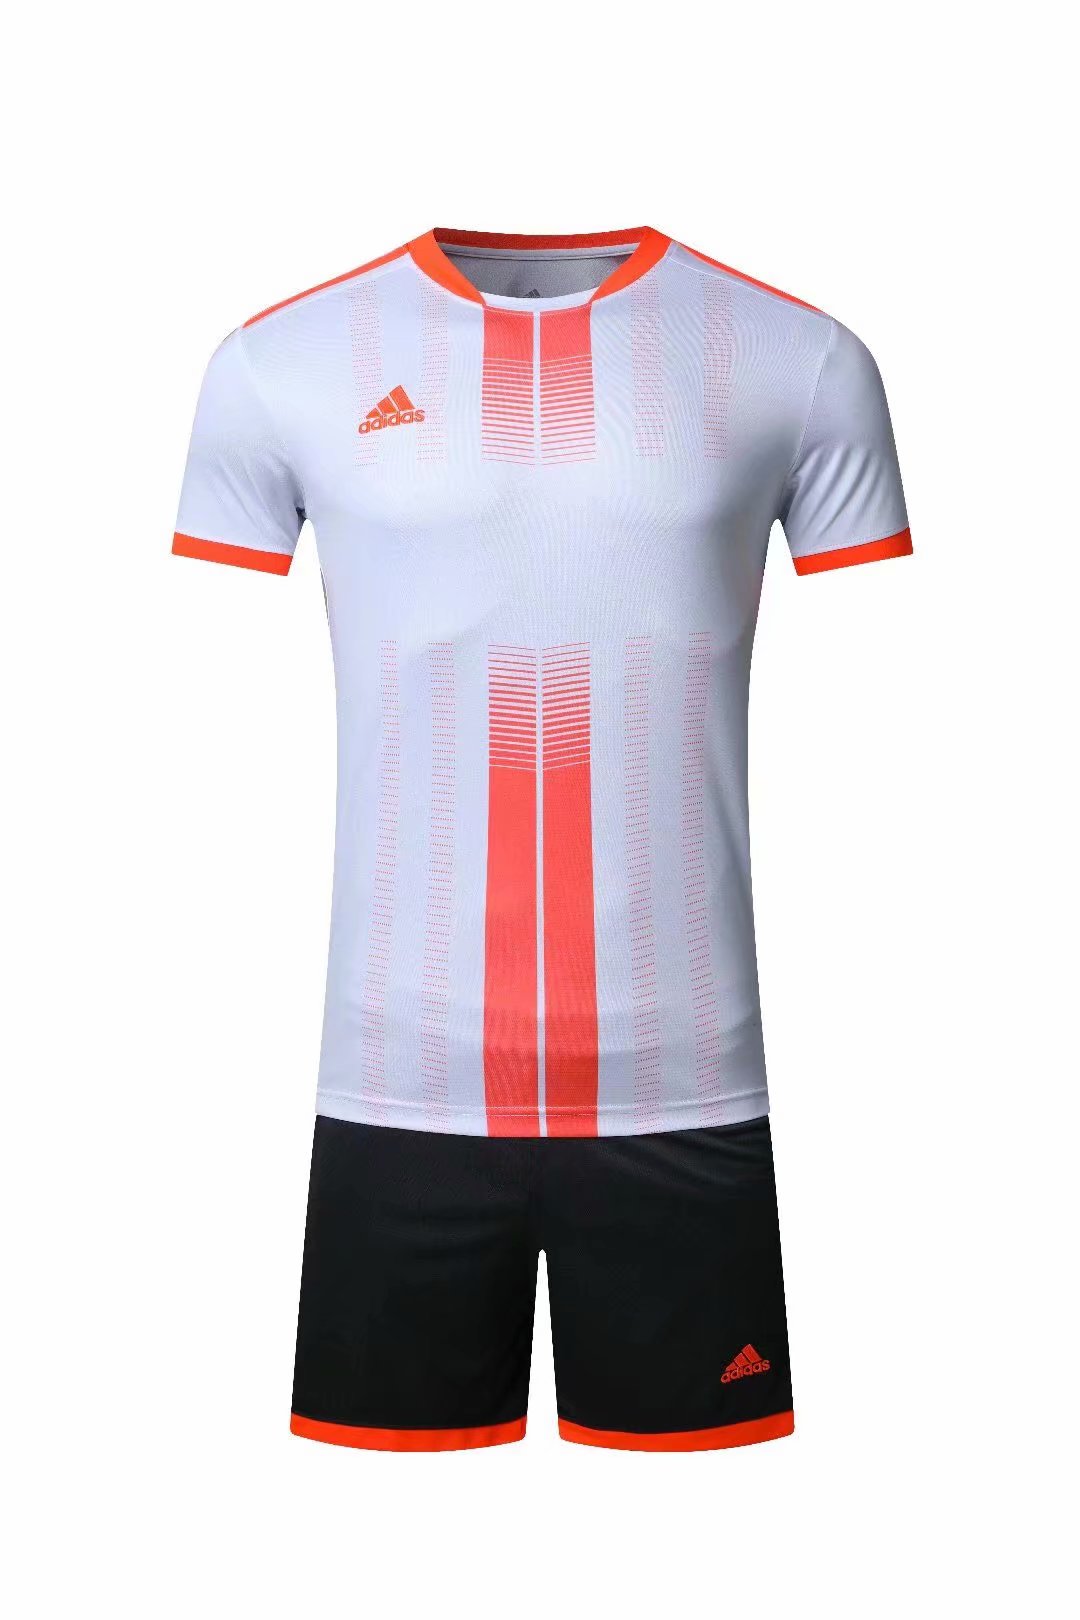 Adidas Full Football Kit Adult Sizes only - White with Orange Vertical –  MyFootyKit - Football Kits and Teamwear for 5 a side, 11 a side and Clubs